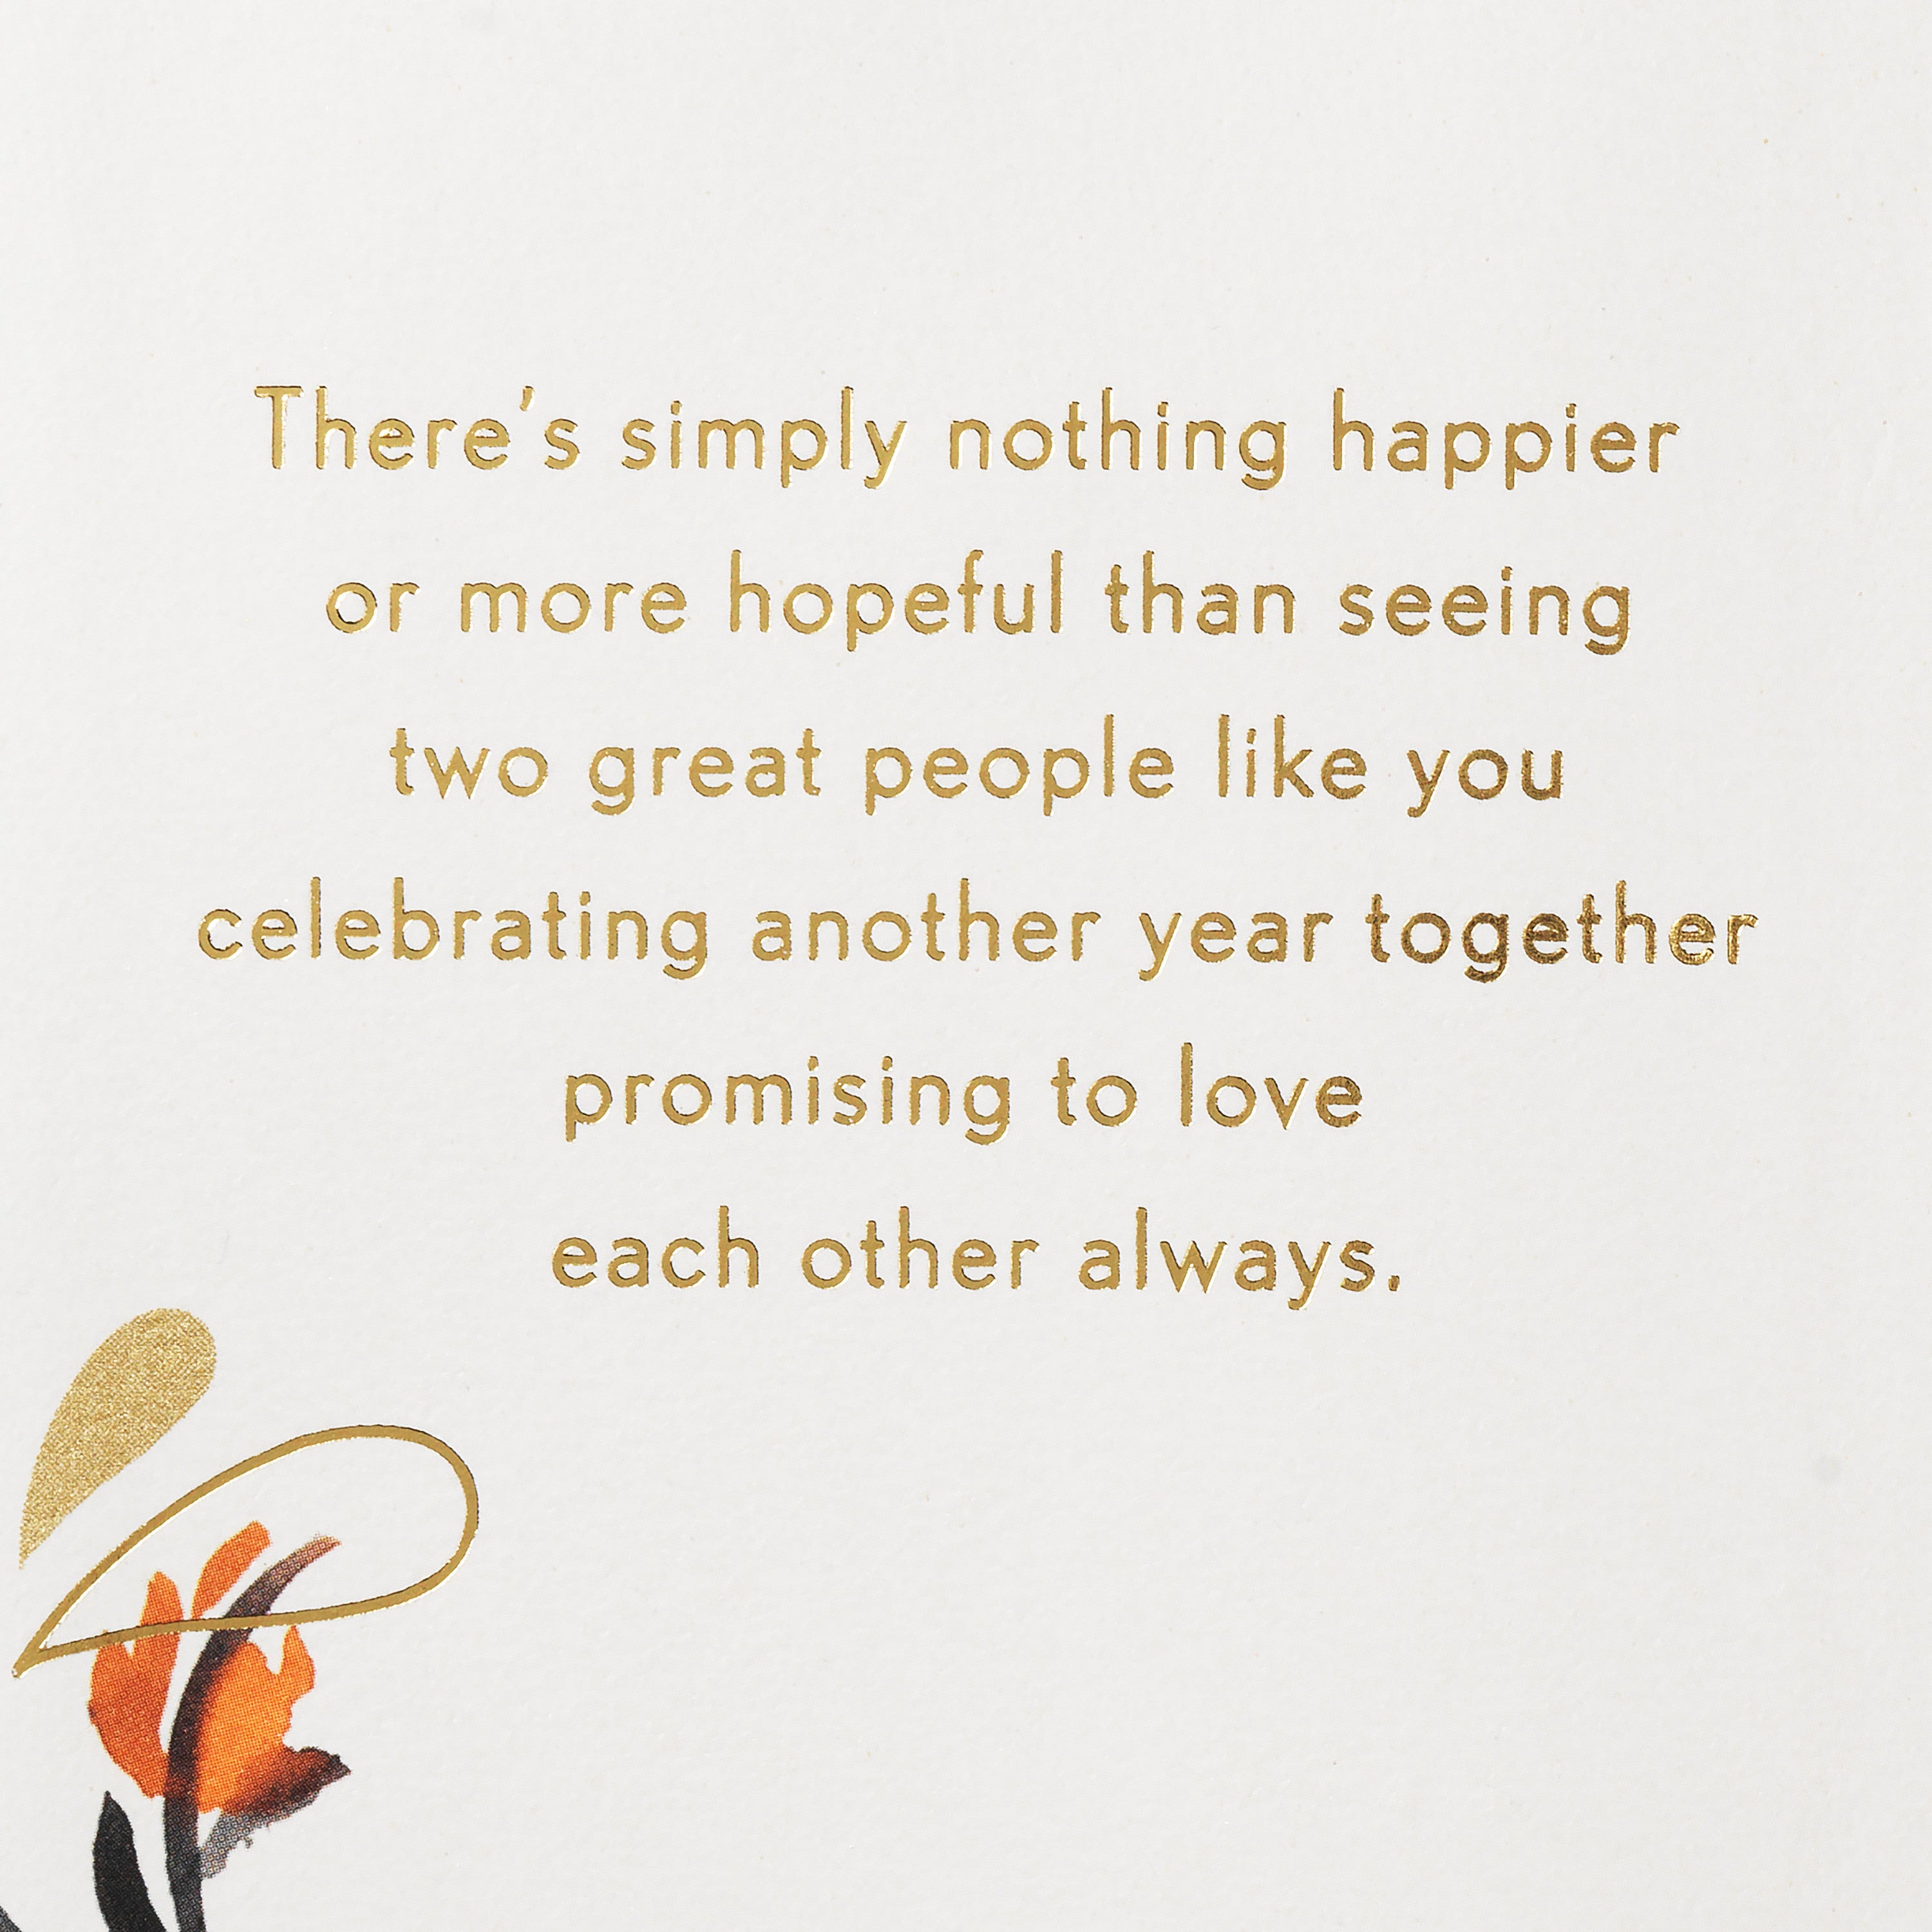 Hallmark Anniversary Card for Couple (Loving Wishes)